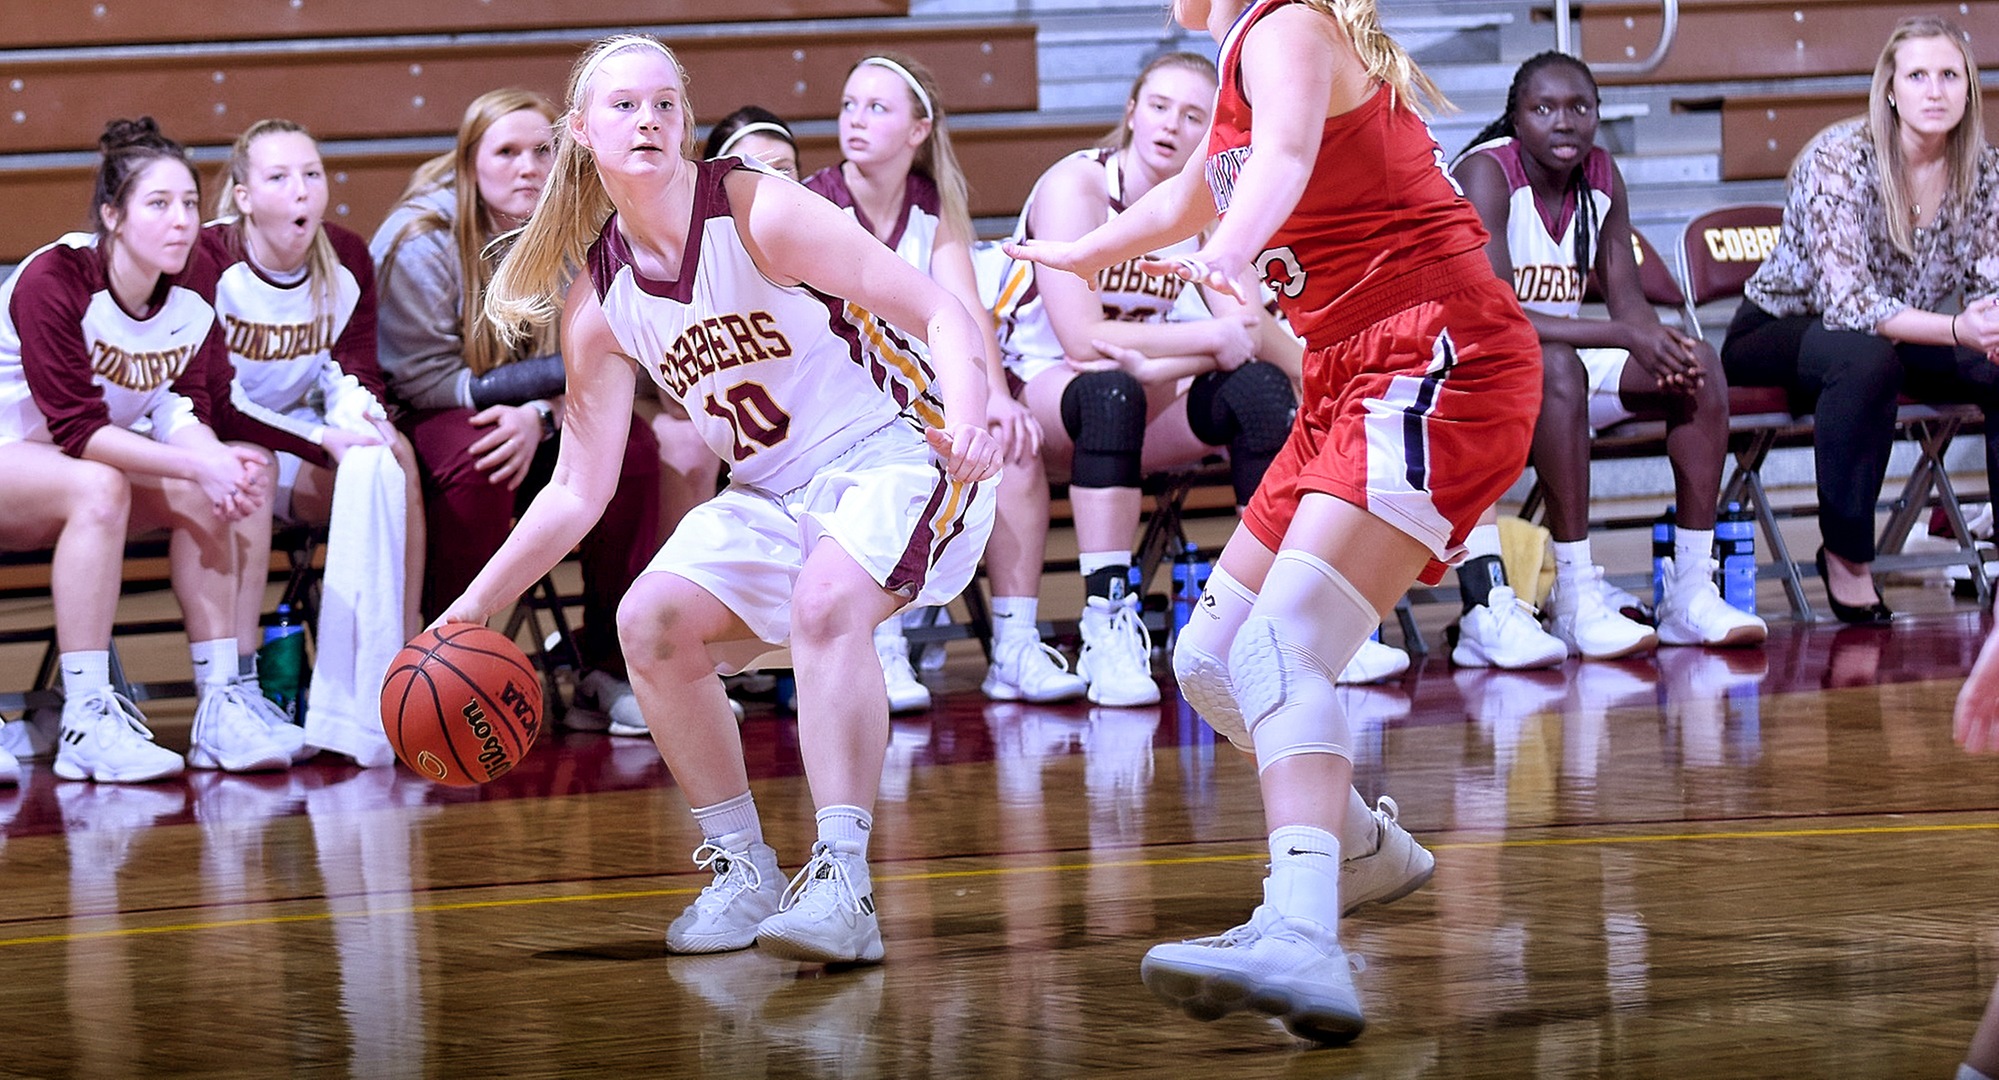 Sophomore Elizabeth Birkemeyer  dribbles the ball towards the basket in the second half of the Cobbers' game with St. Mary's. She finished with career-high totals in points, rebounds and assists.